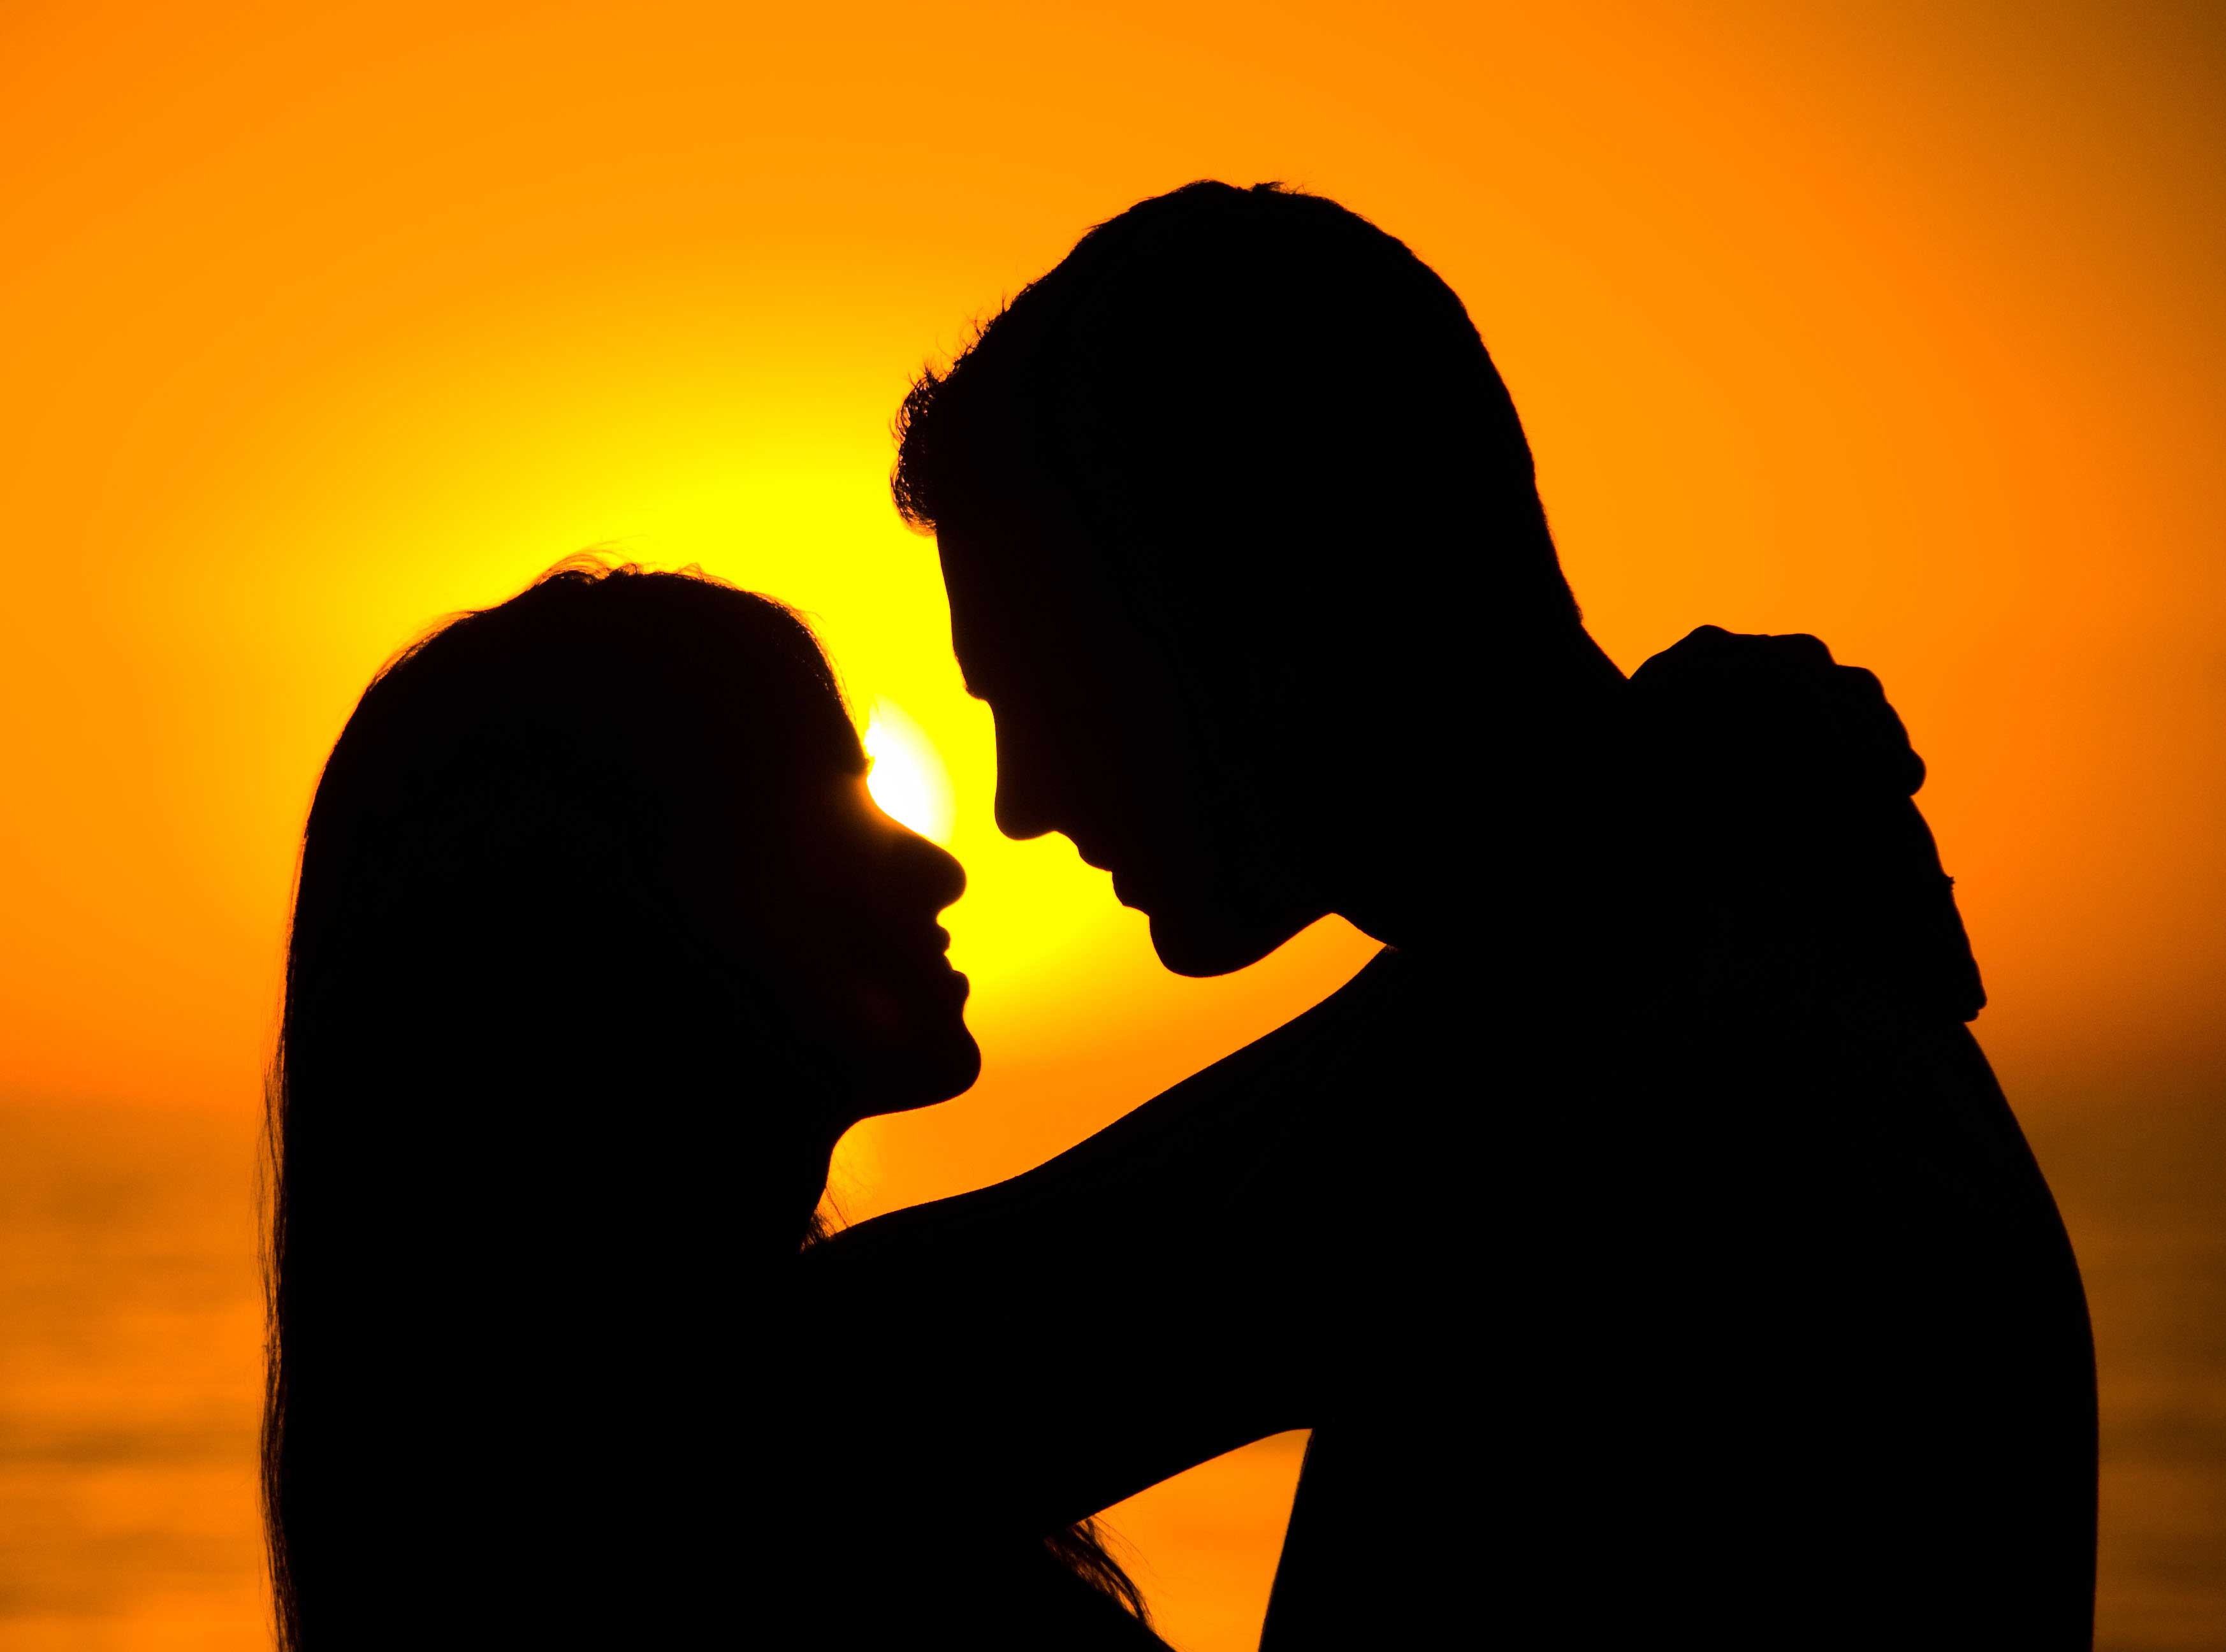 Picture Of Love Couples At Sunset, Couple Sunset You May Be Just One Person But For One Person